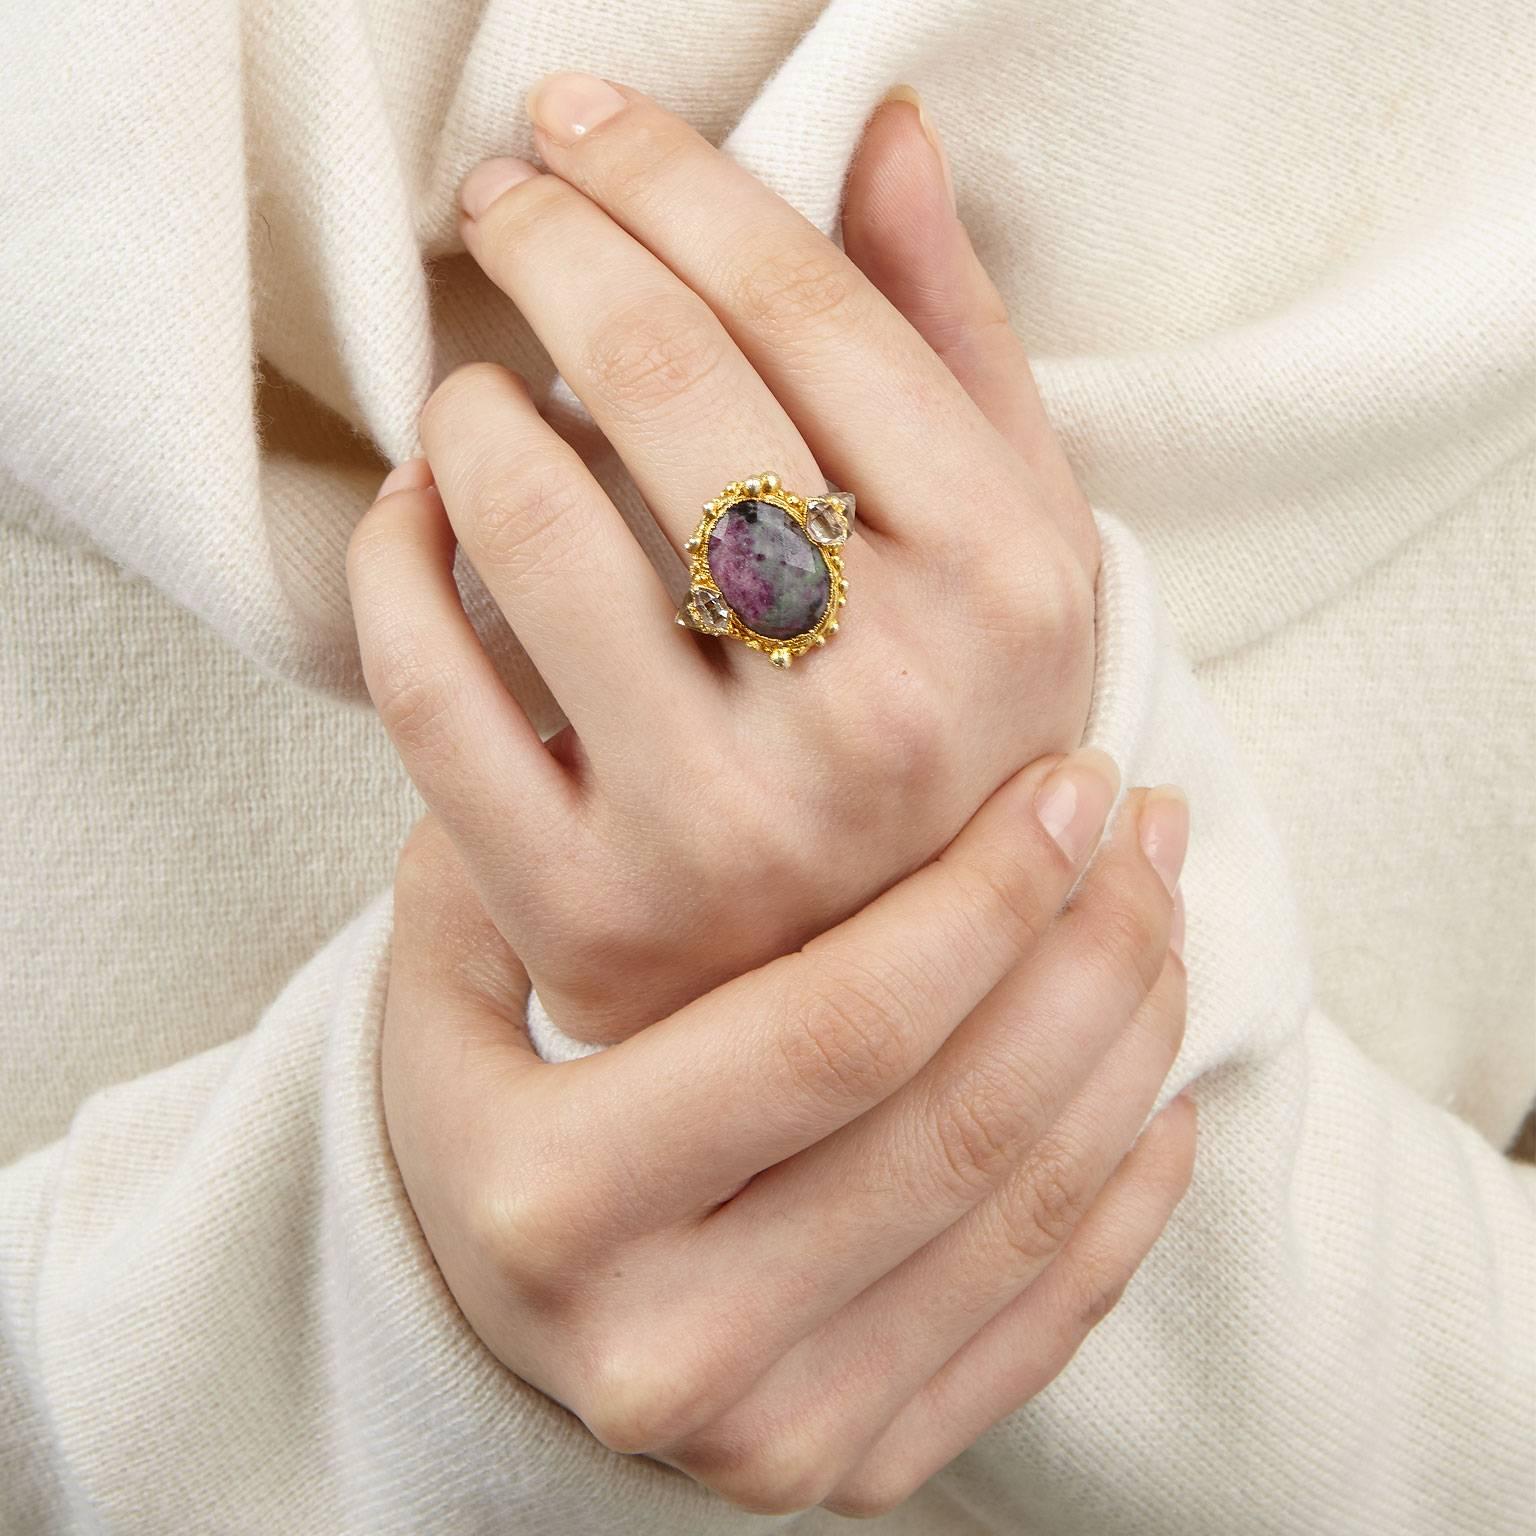 Revel in the regal beauty of the Queen Anne's Revenge ring. A rose-cut ruby zoisite stone sits at its centre flanked by herkimer crystals on either side, encrusted in granules of gold plated silver atop a hammered band. Stunning and fierce in equal